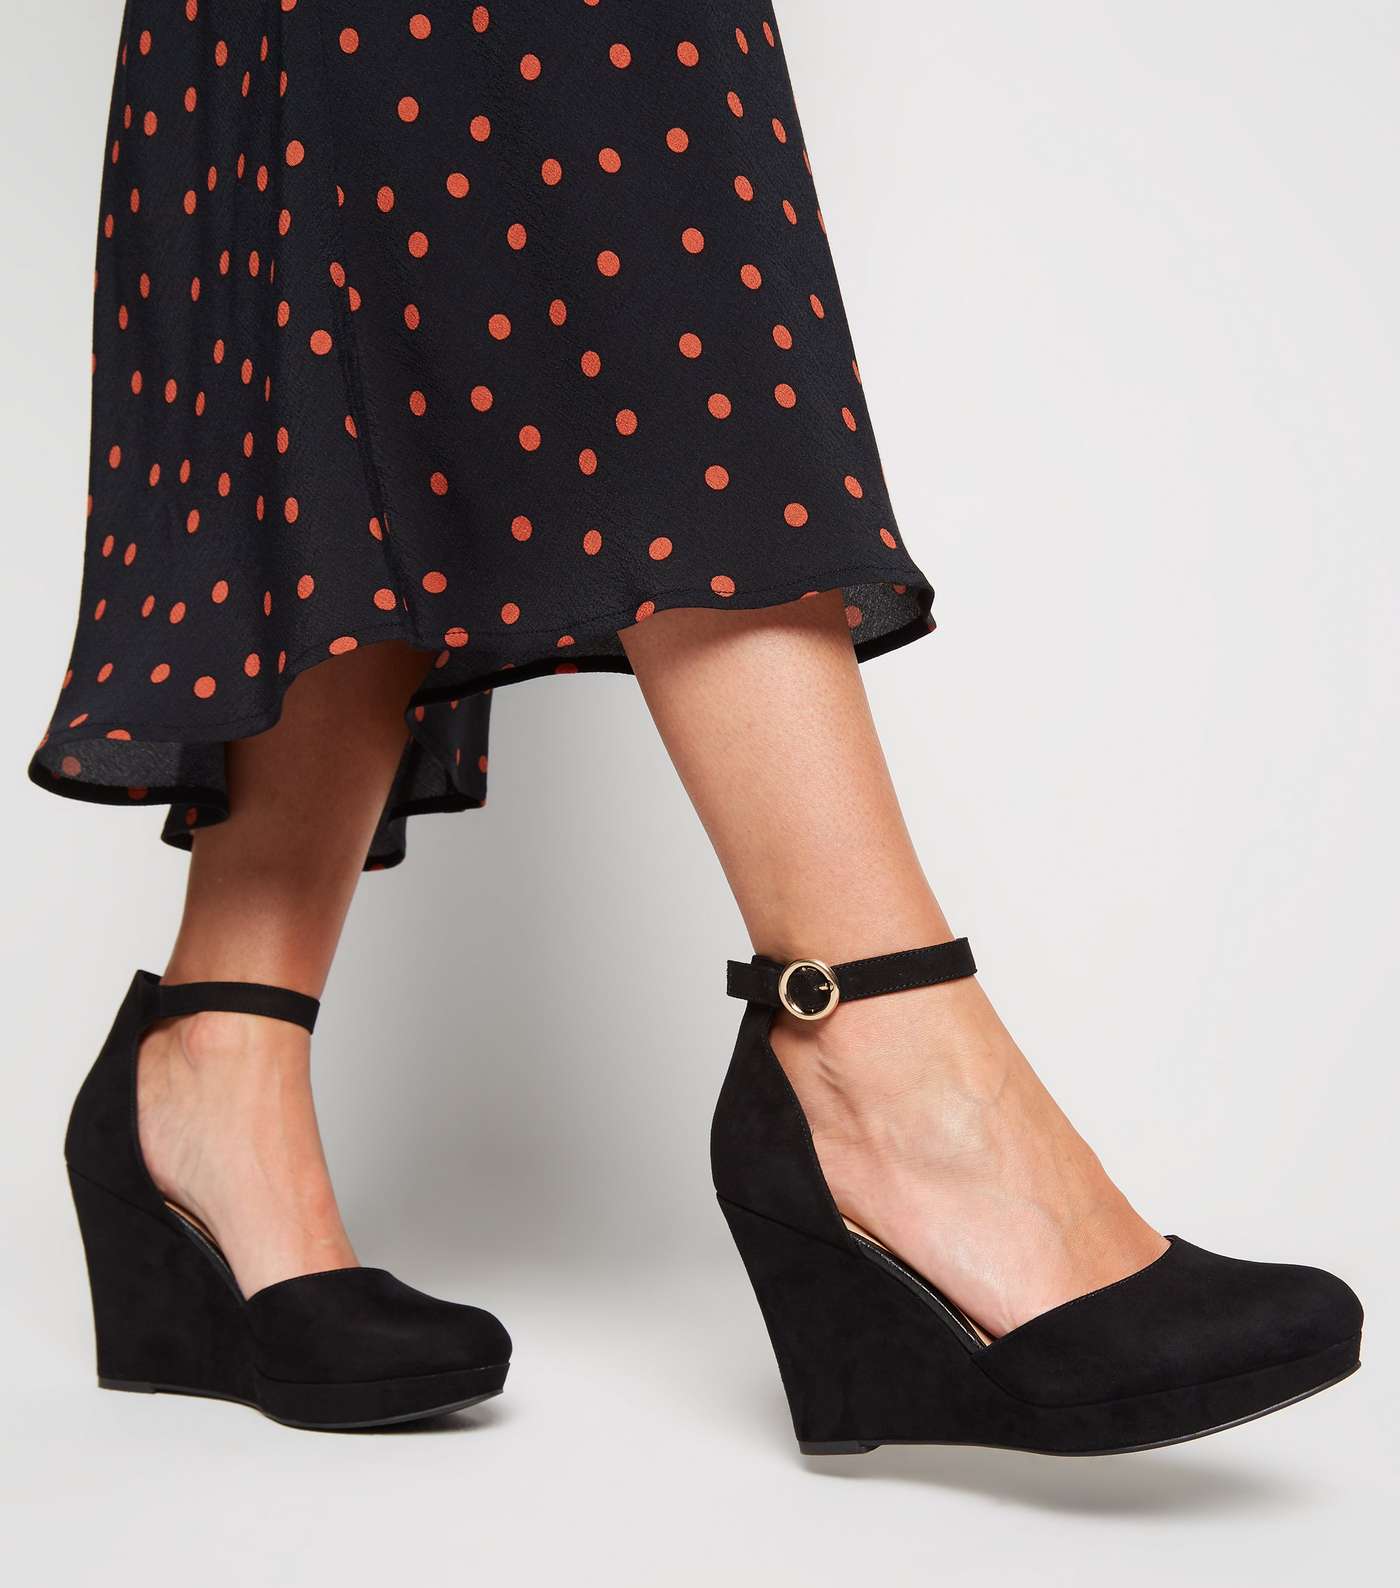 Wide Fit Black Suedette Wedge Courts Image 2